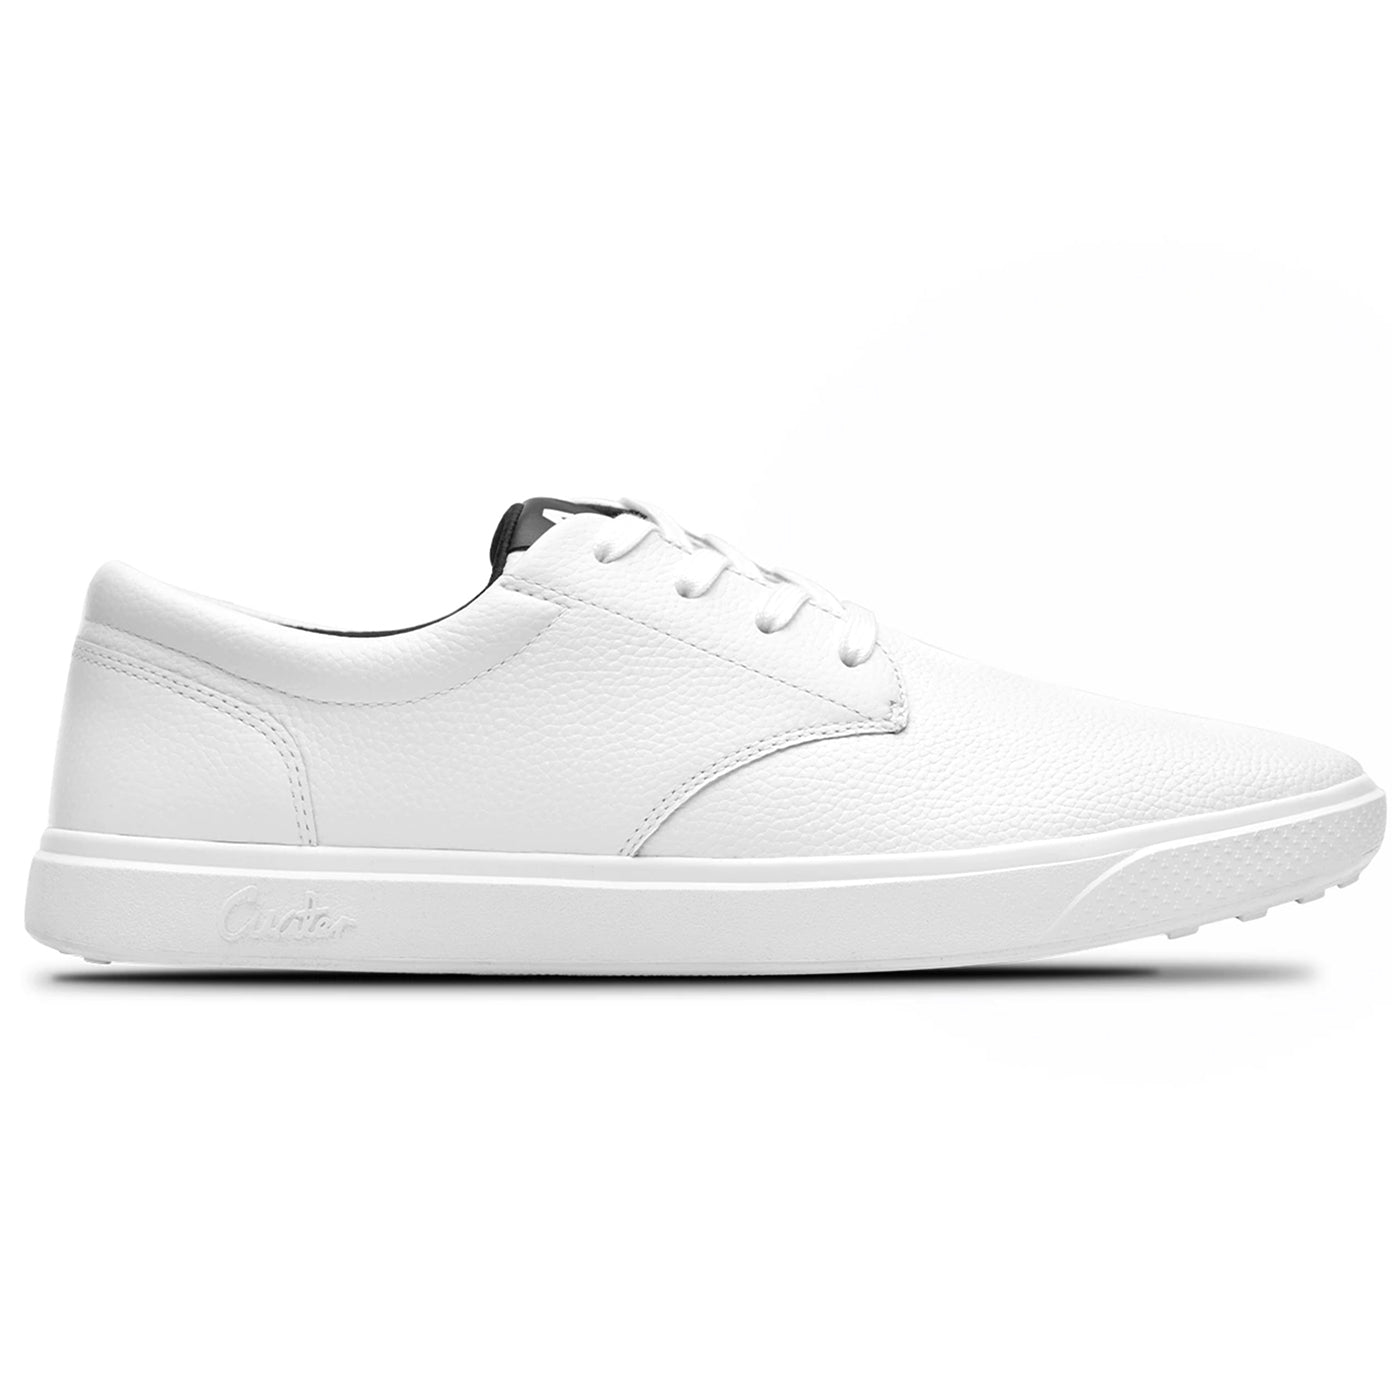 Cuater The Wildcard Leather Golf Shoes 4MU189 White | Function18 ...